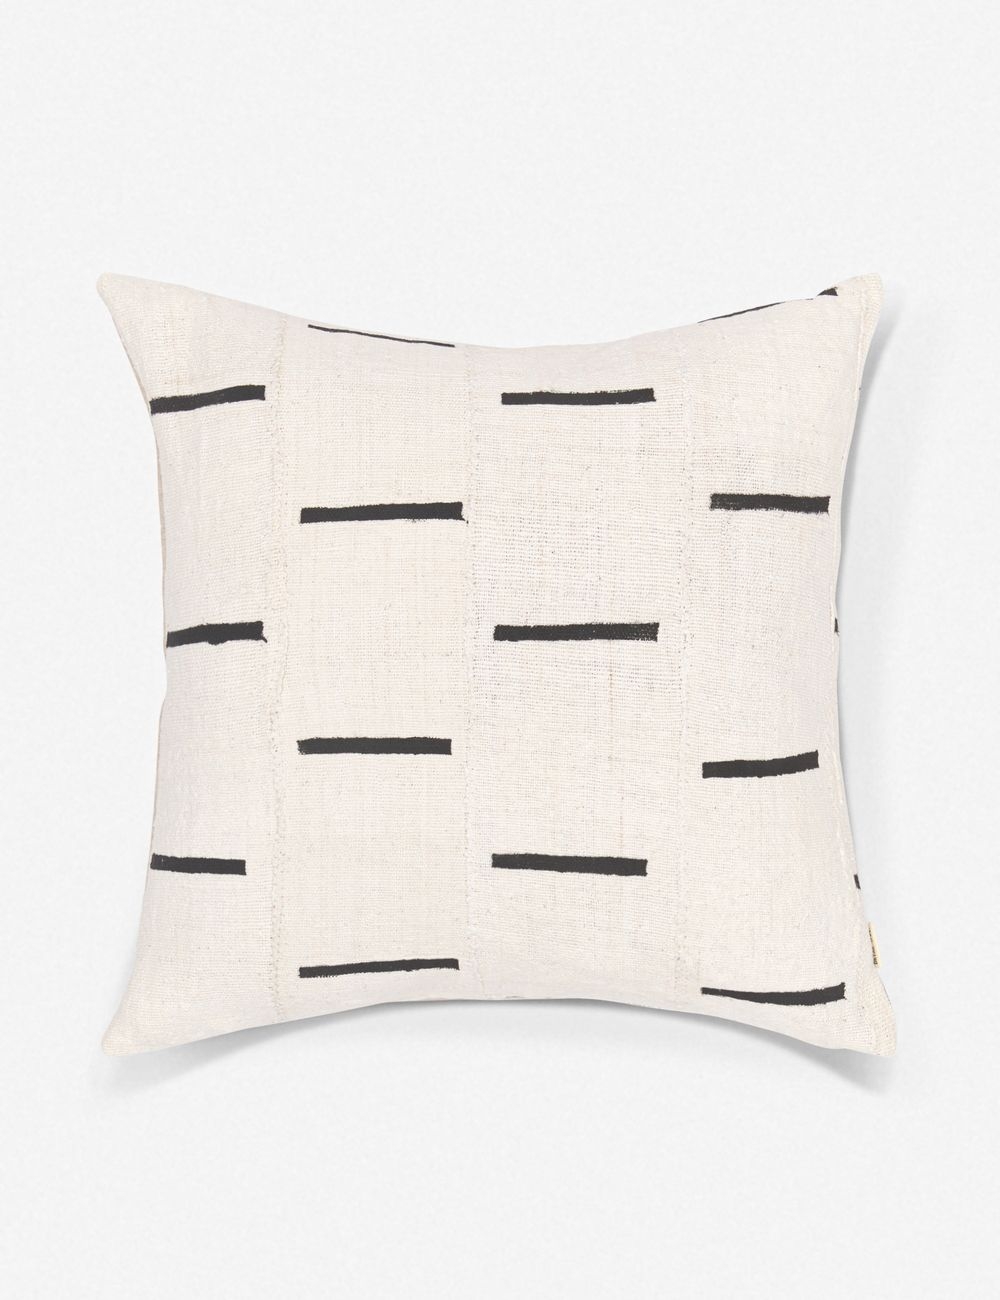 Rainey One of a Kind Mudcloth Pillow - Image 0